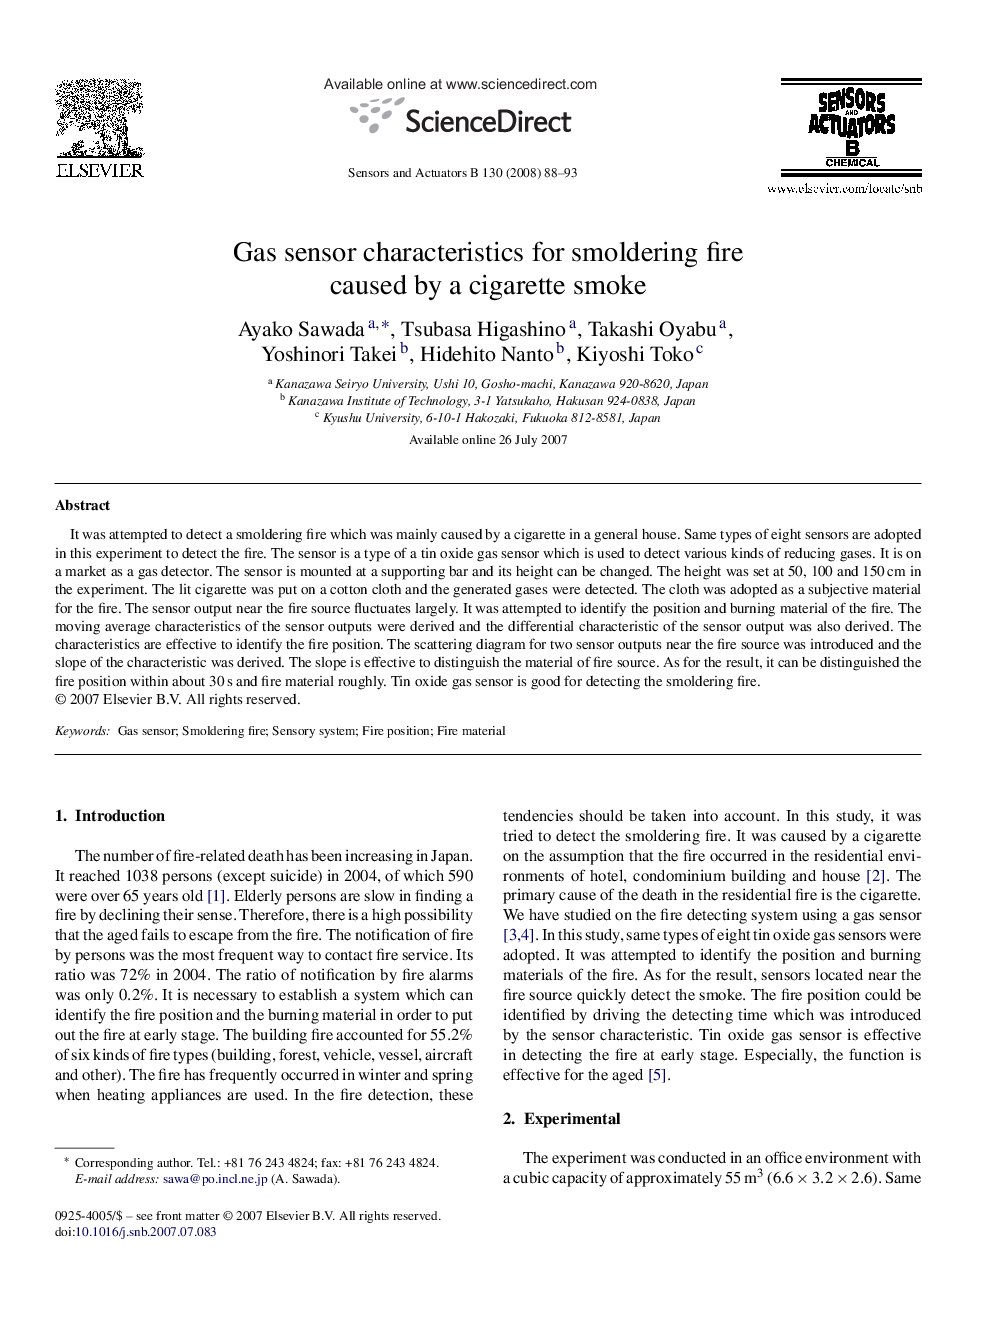 Gas sensor characteristics for smoldering fire caused by a cigarette smoke